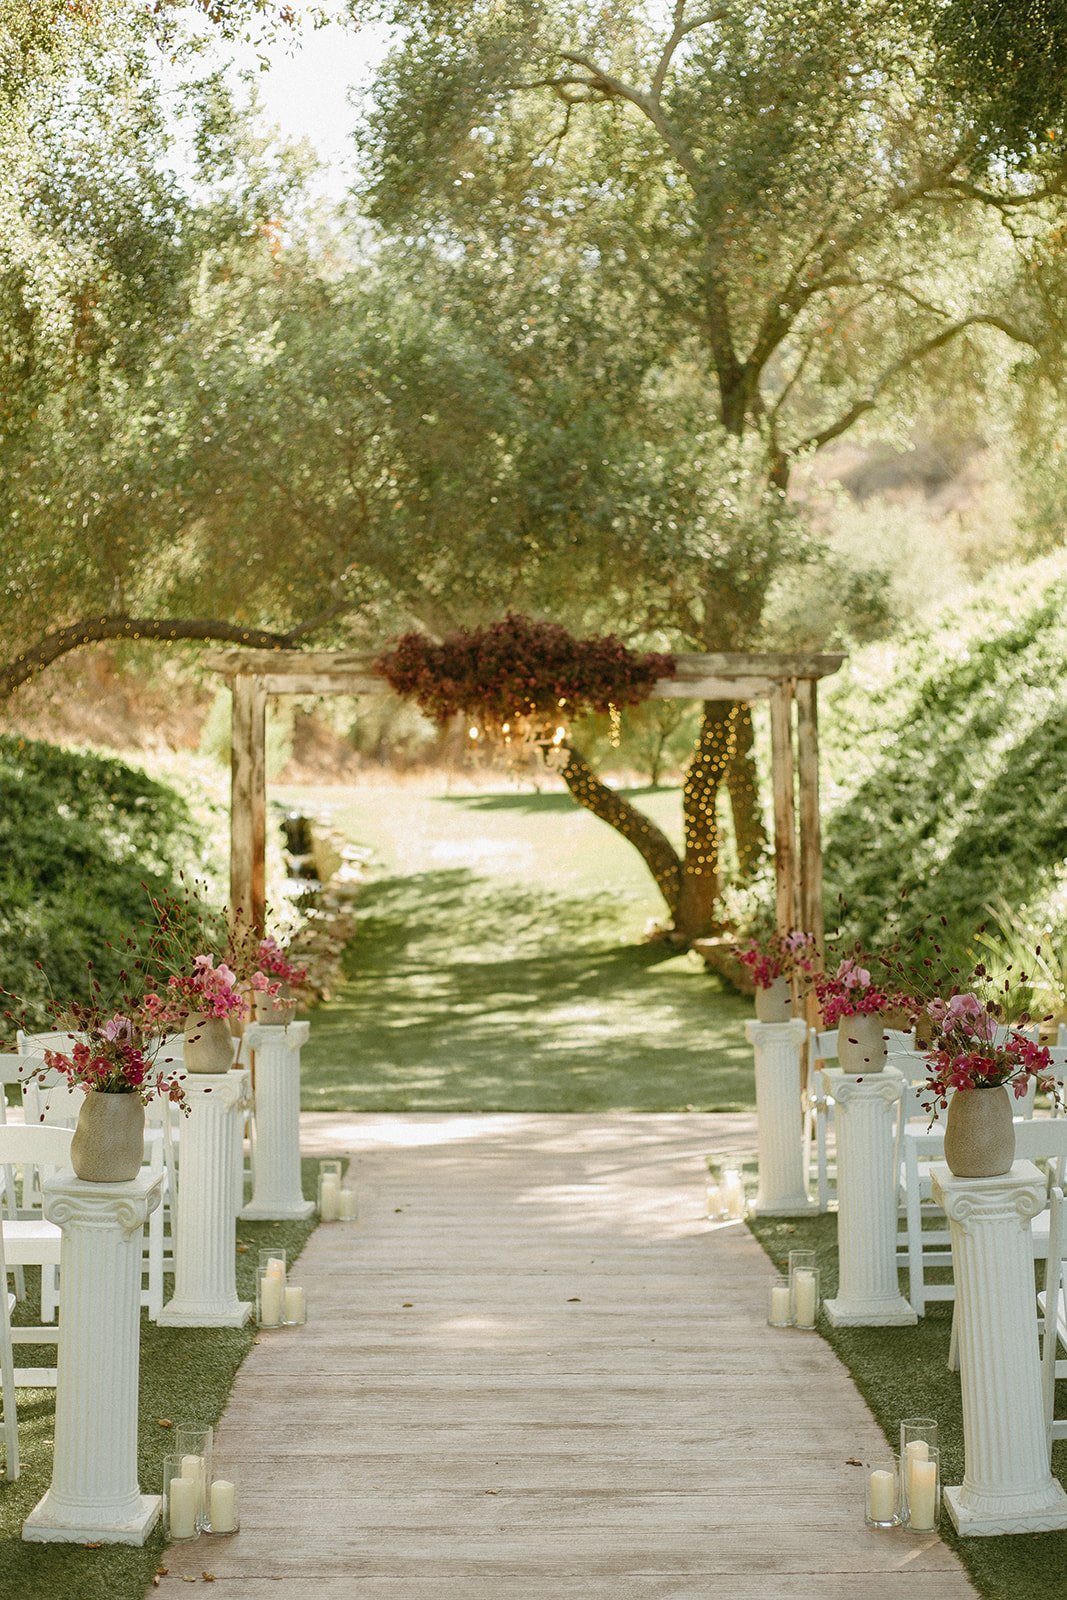 Intimate Wedding Ceremony with Elegant decor and floral arrangements